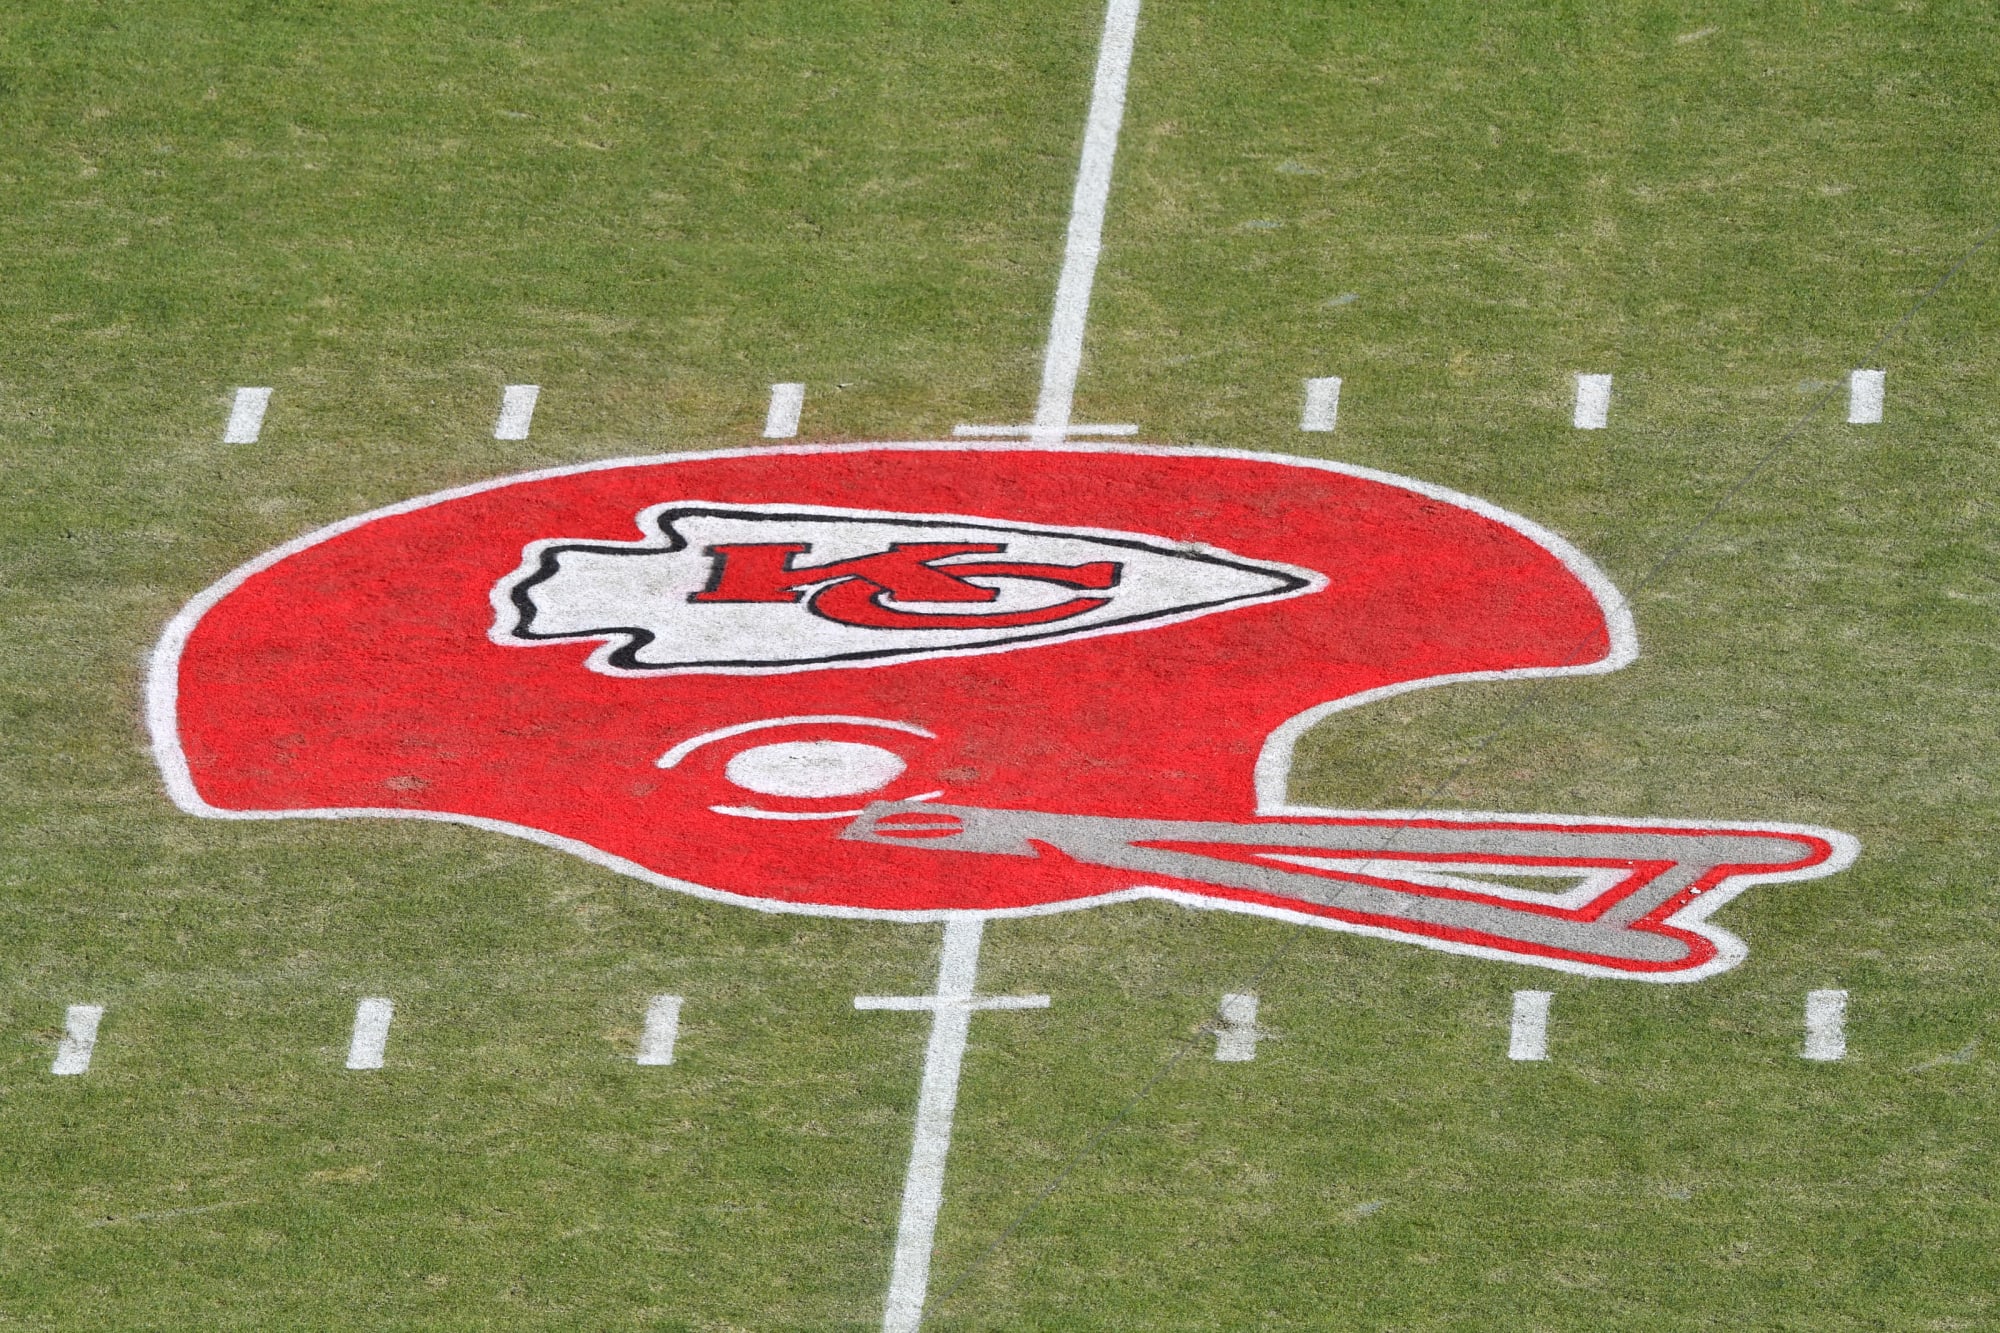 Why places like Arrowhead Stadium might be less likely to produce concussions